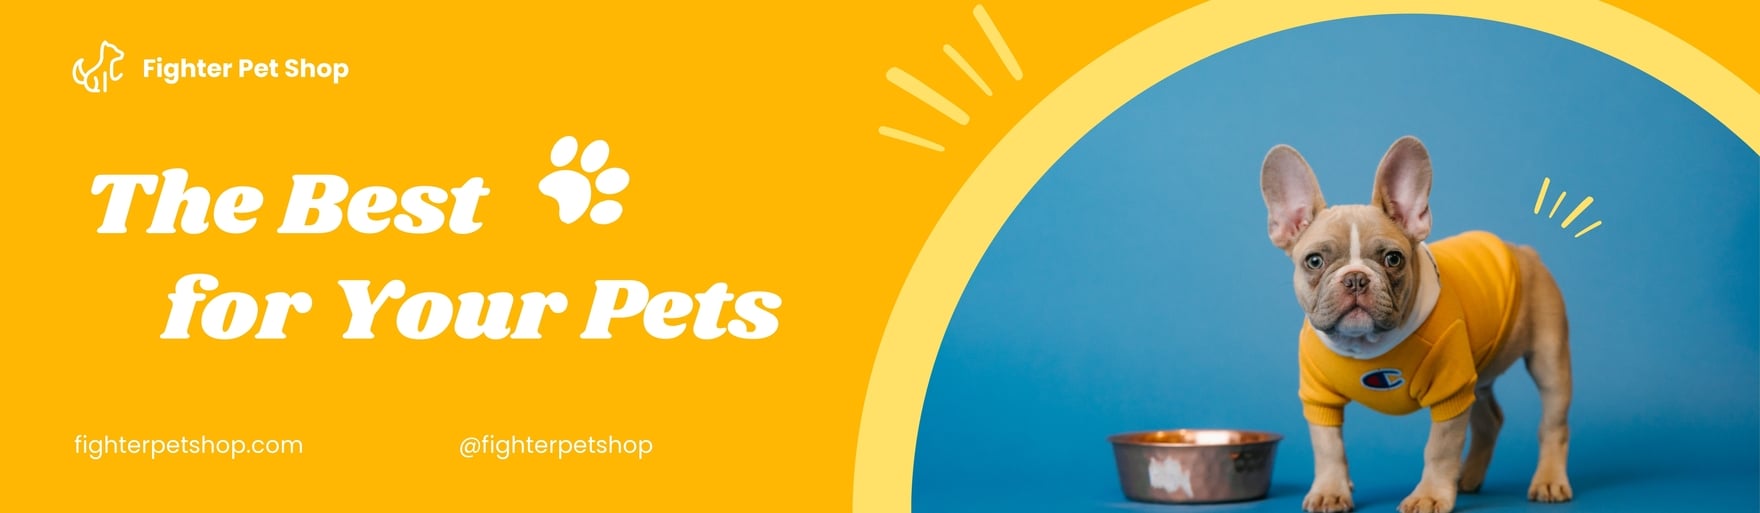 Pets Shop Billboard Template in Word, Google Docs, Apple Pages, Publisher